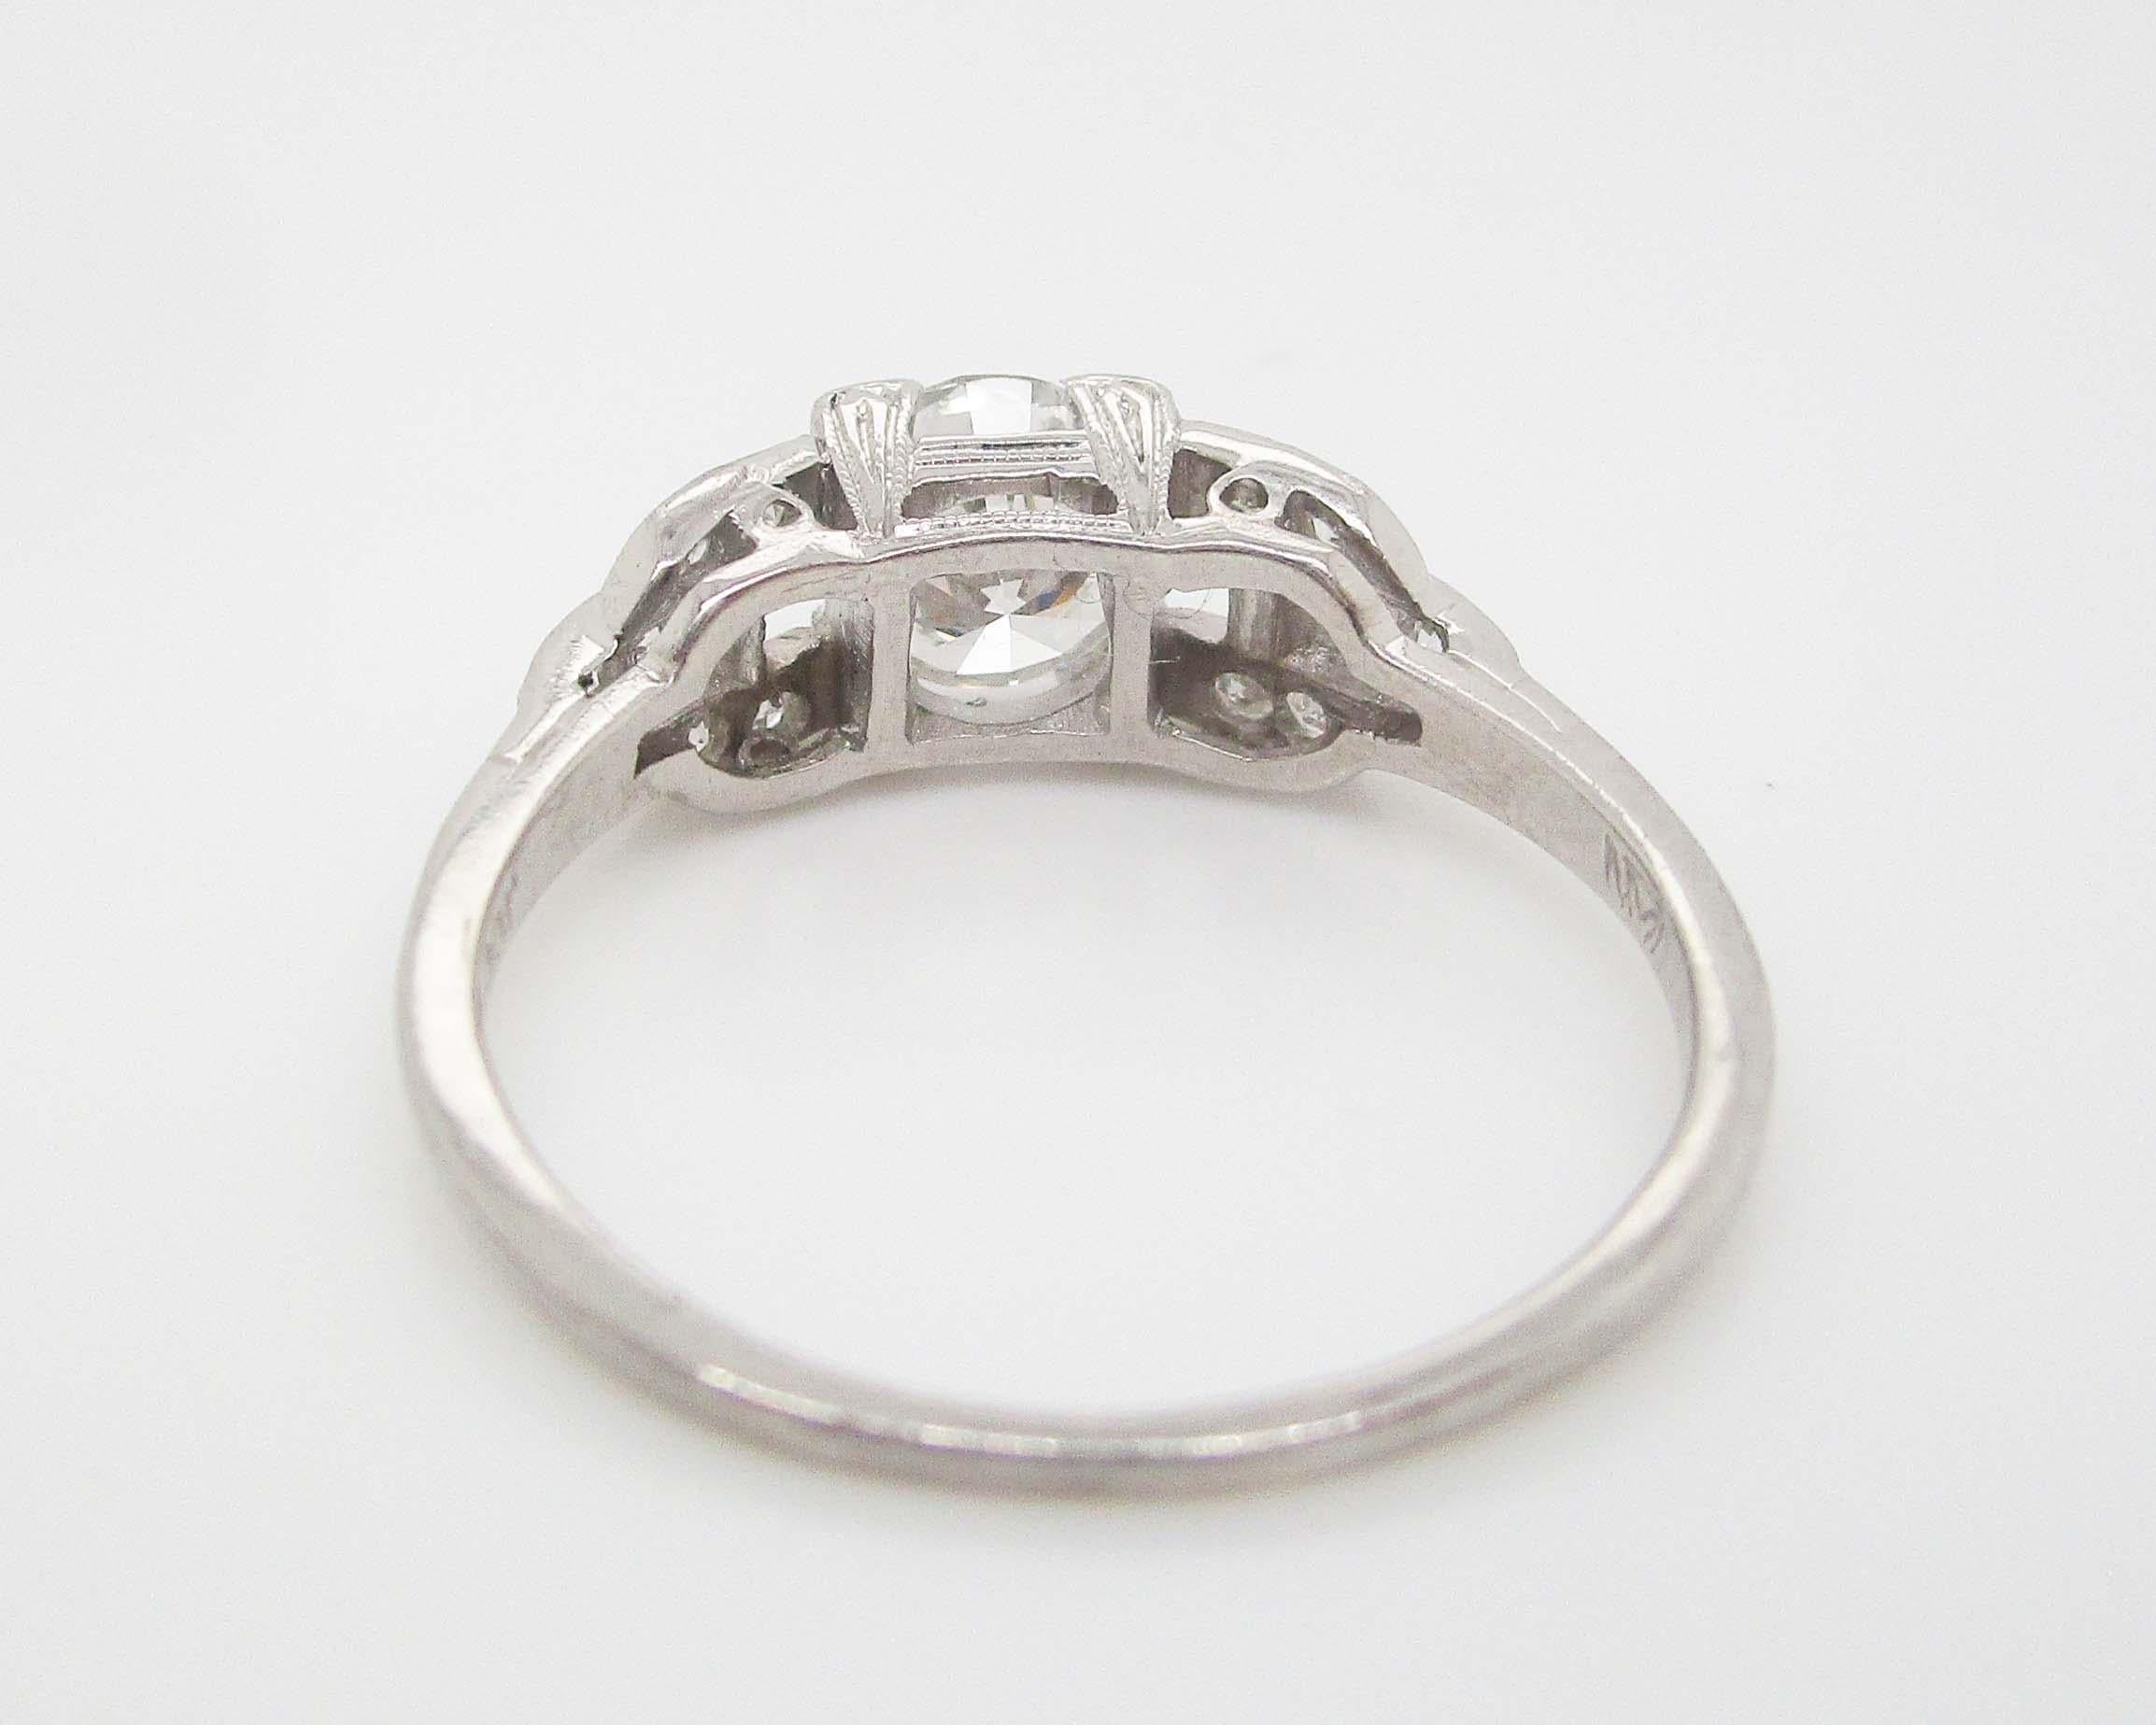 1920's Deco European Cut Diamond Engagement Ring with GIA Report For Sale 4